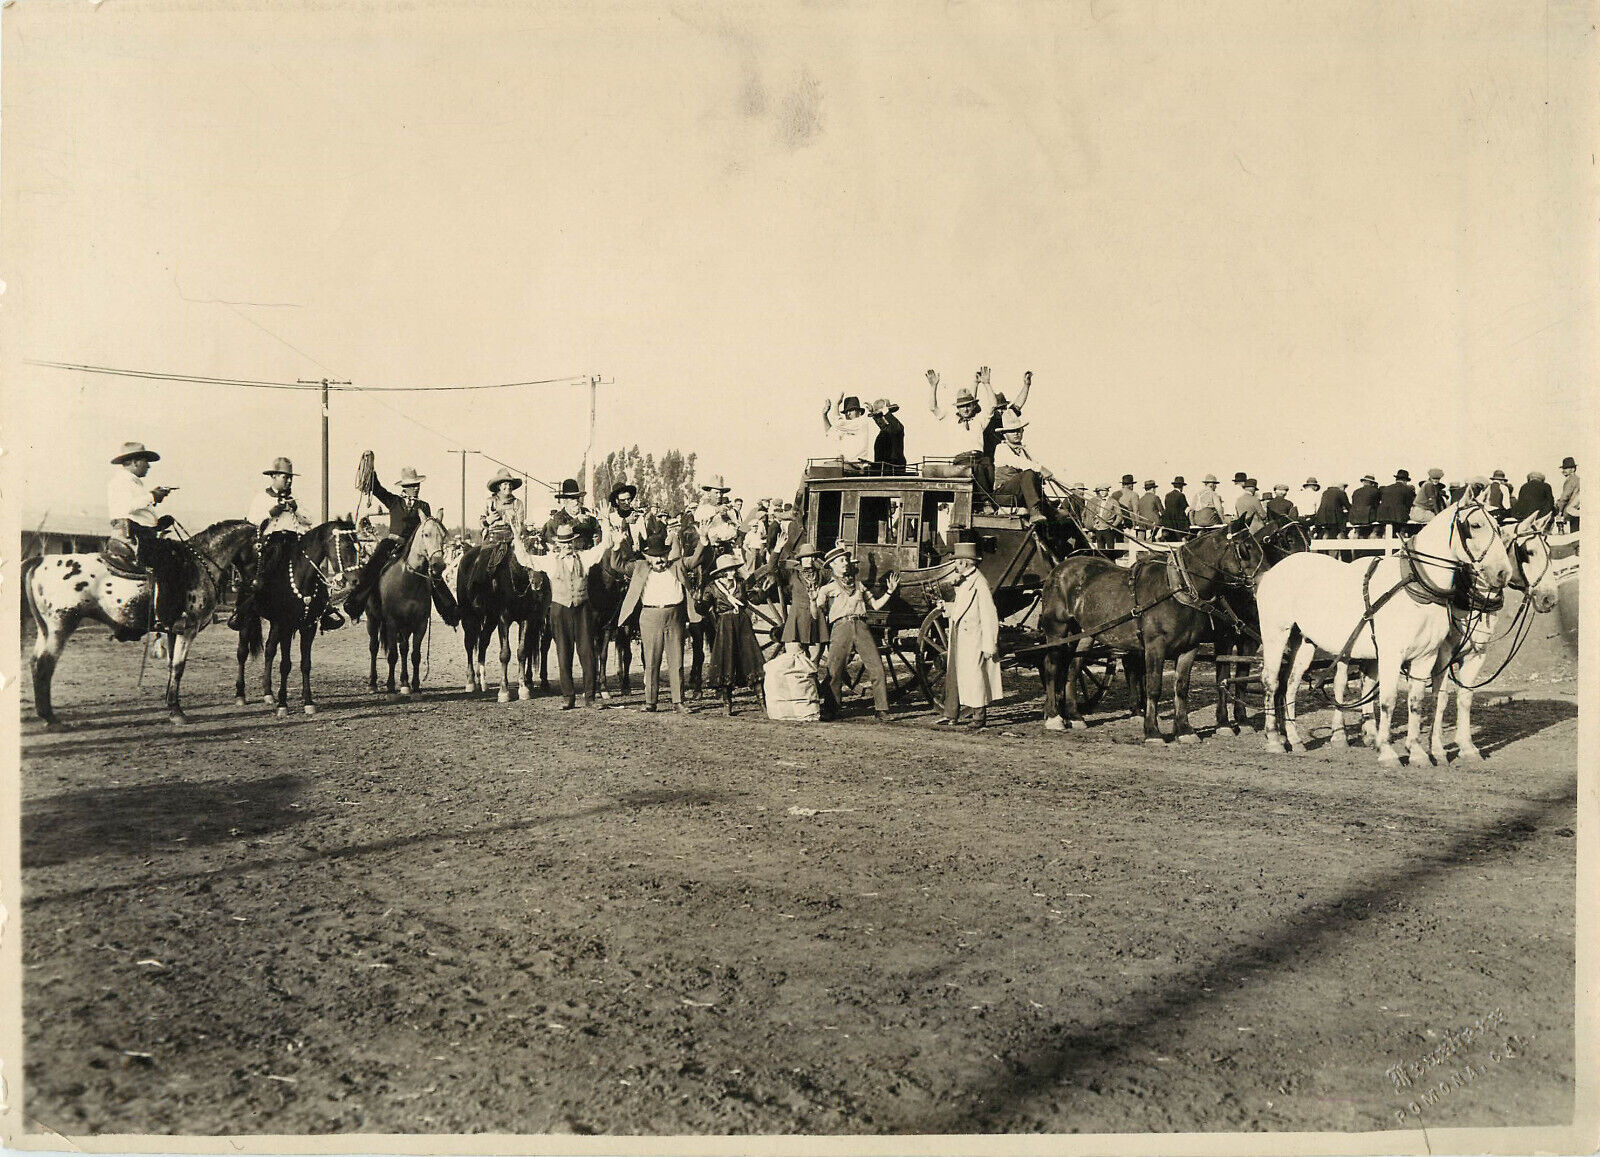 Frasher Photograph 7x10 Stagecoach Cowgirl Hold Up Scene Old West Pomona Fair?